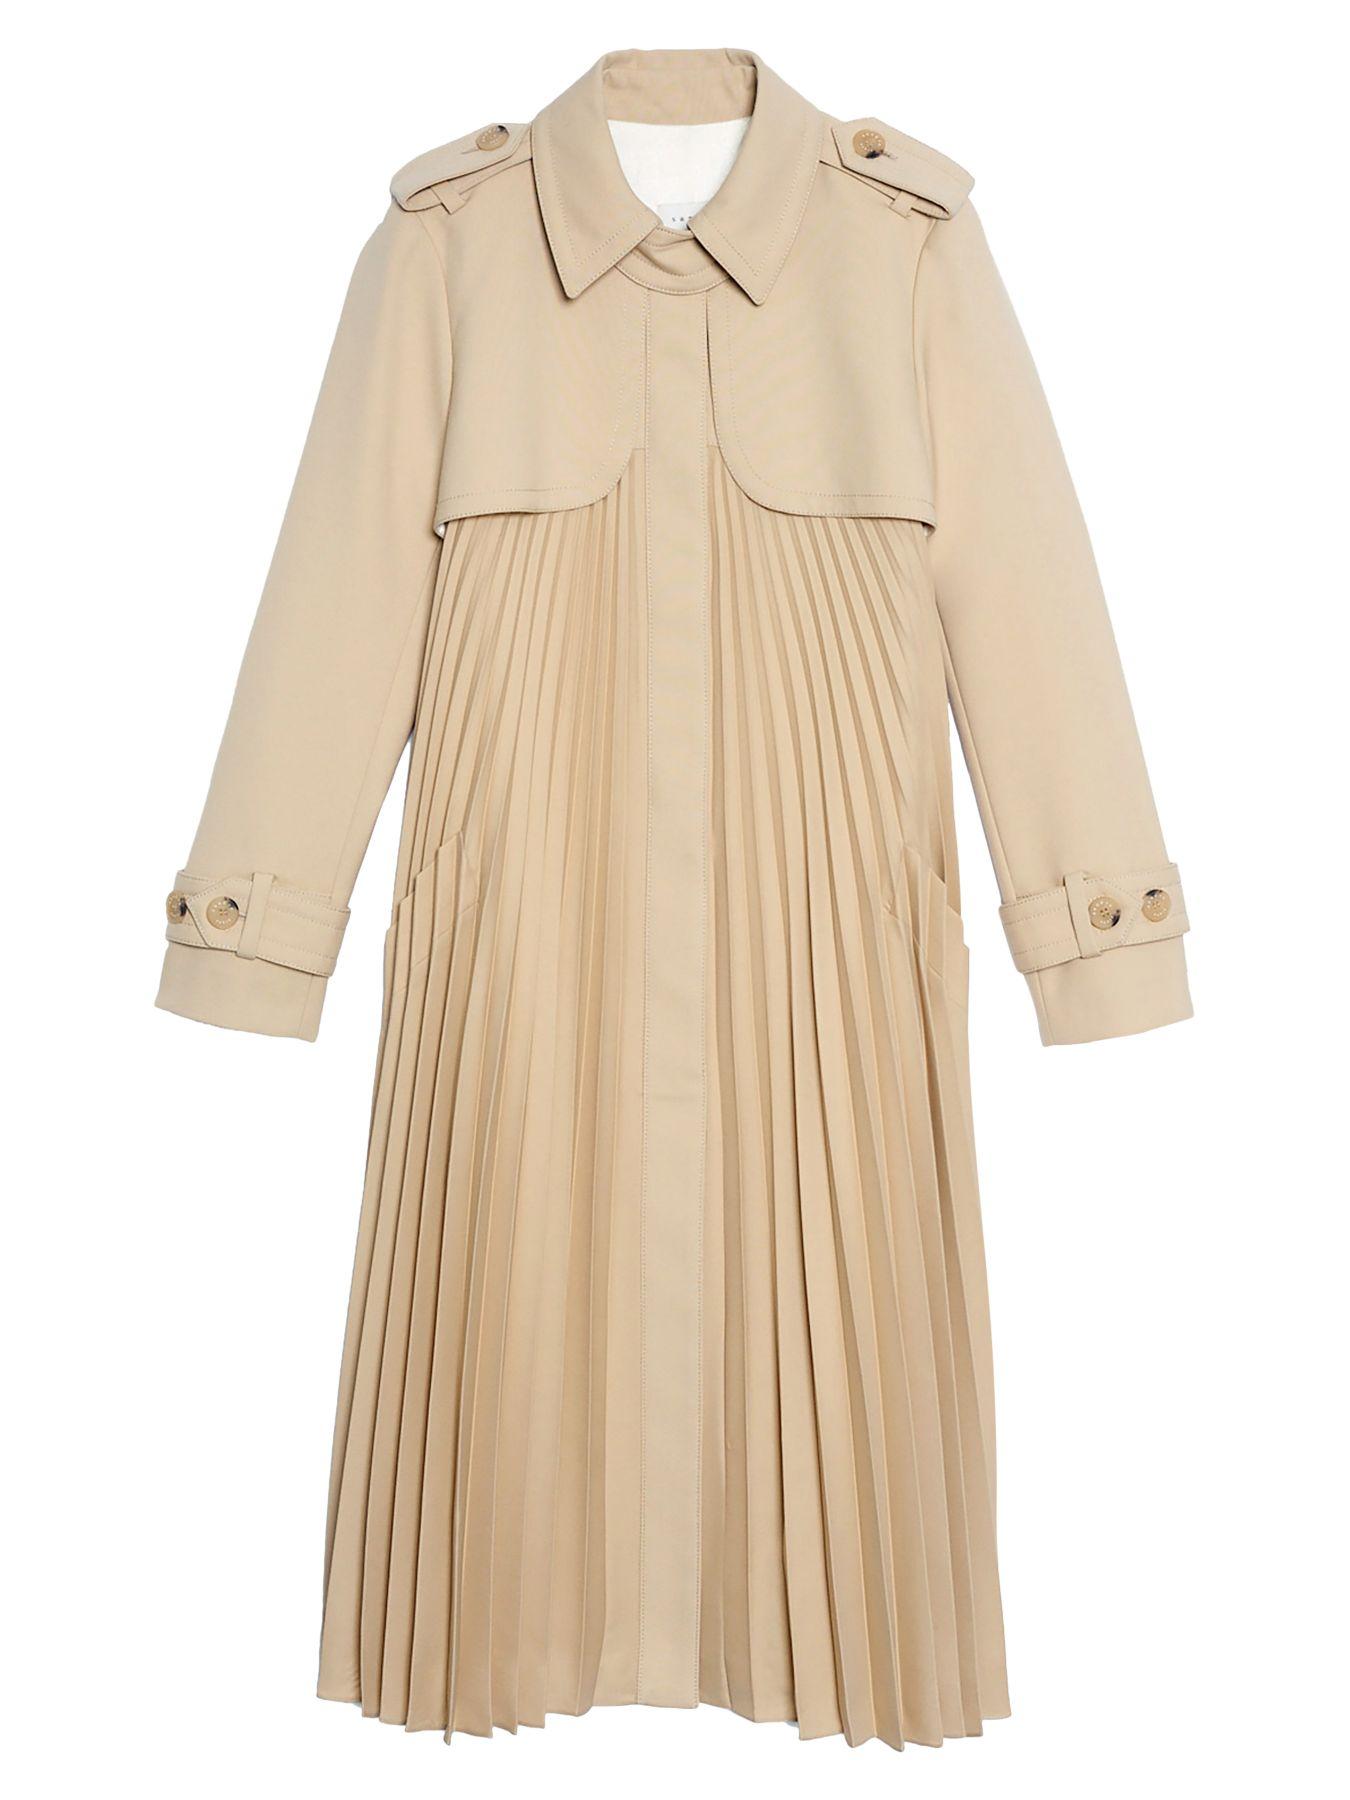 Sandro Synthetic Vino Pleated Trench Coat in Beige (Natural) - Save 21% ...